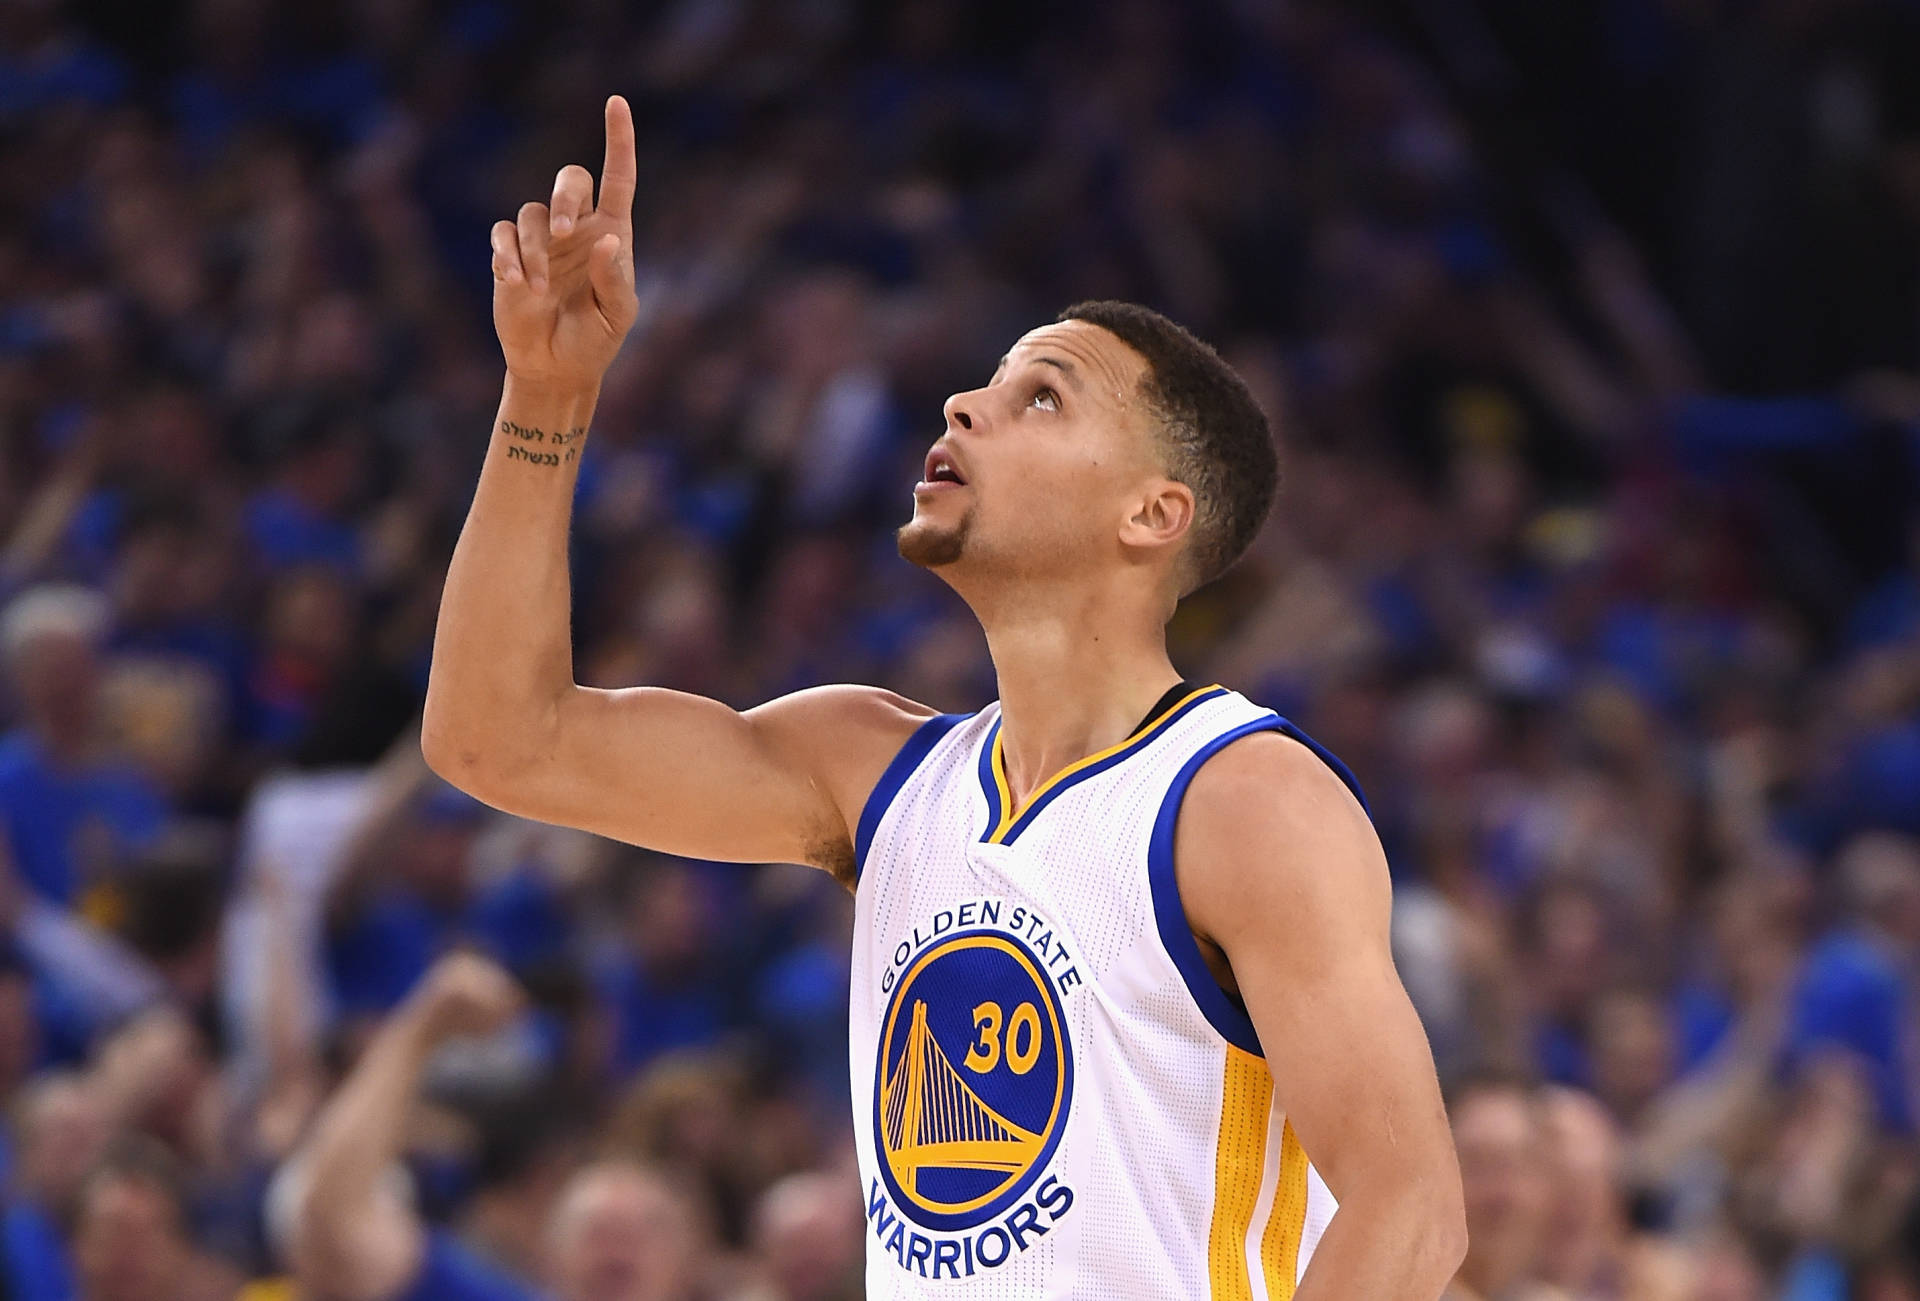 Stephen Curry celebrates another dominant game Wednesday night. (Thearon W. Henderson/Getty)